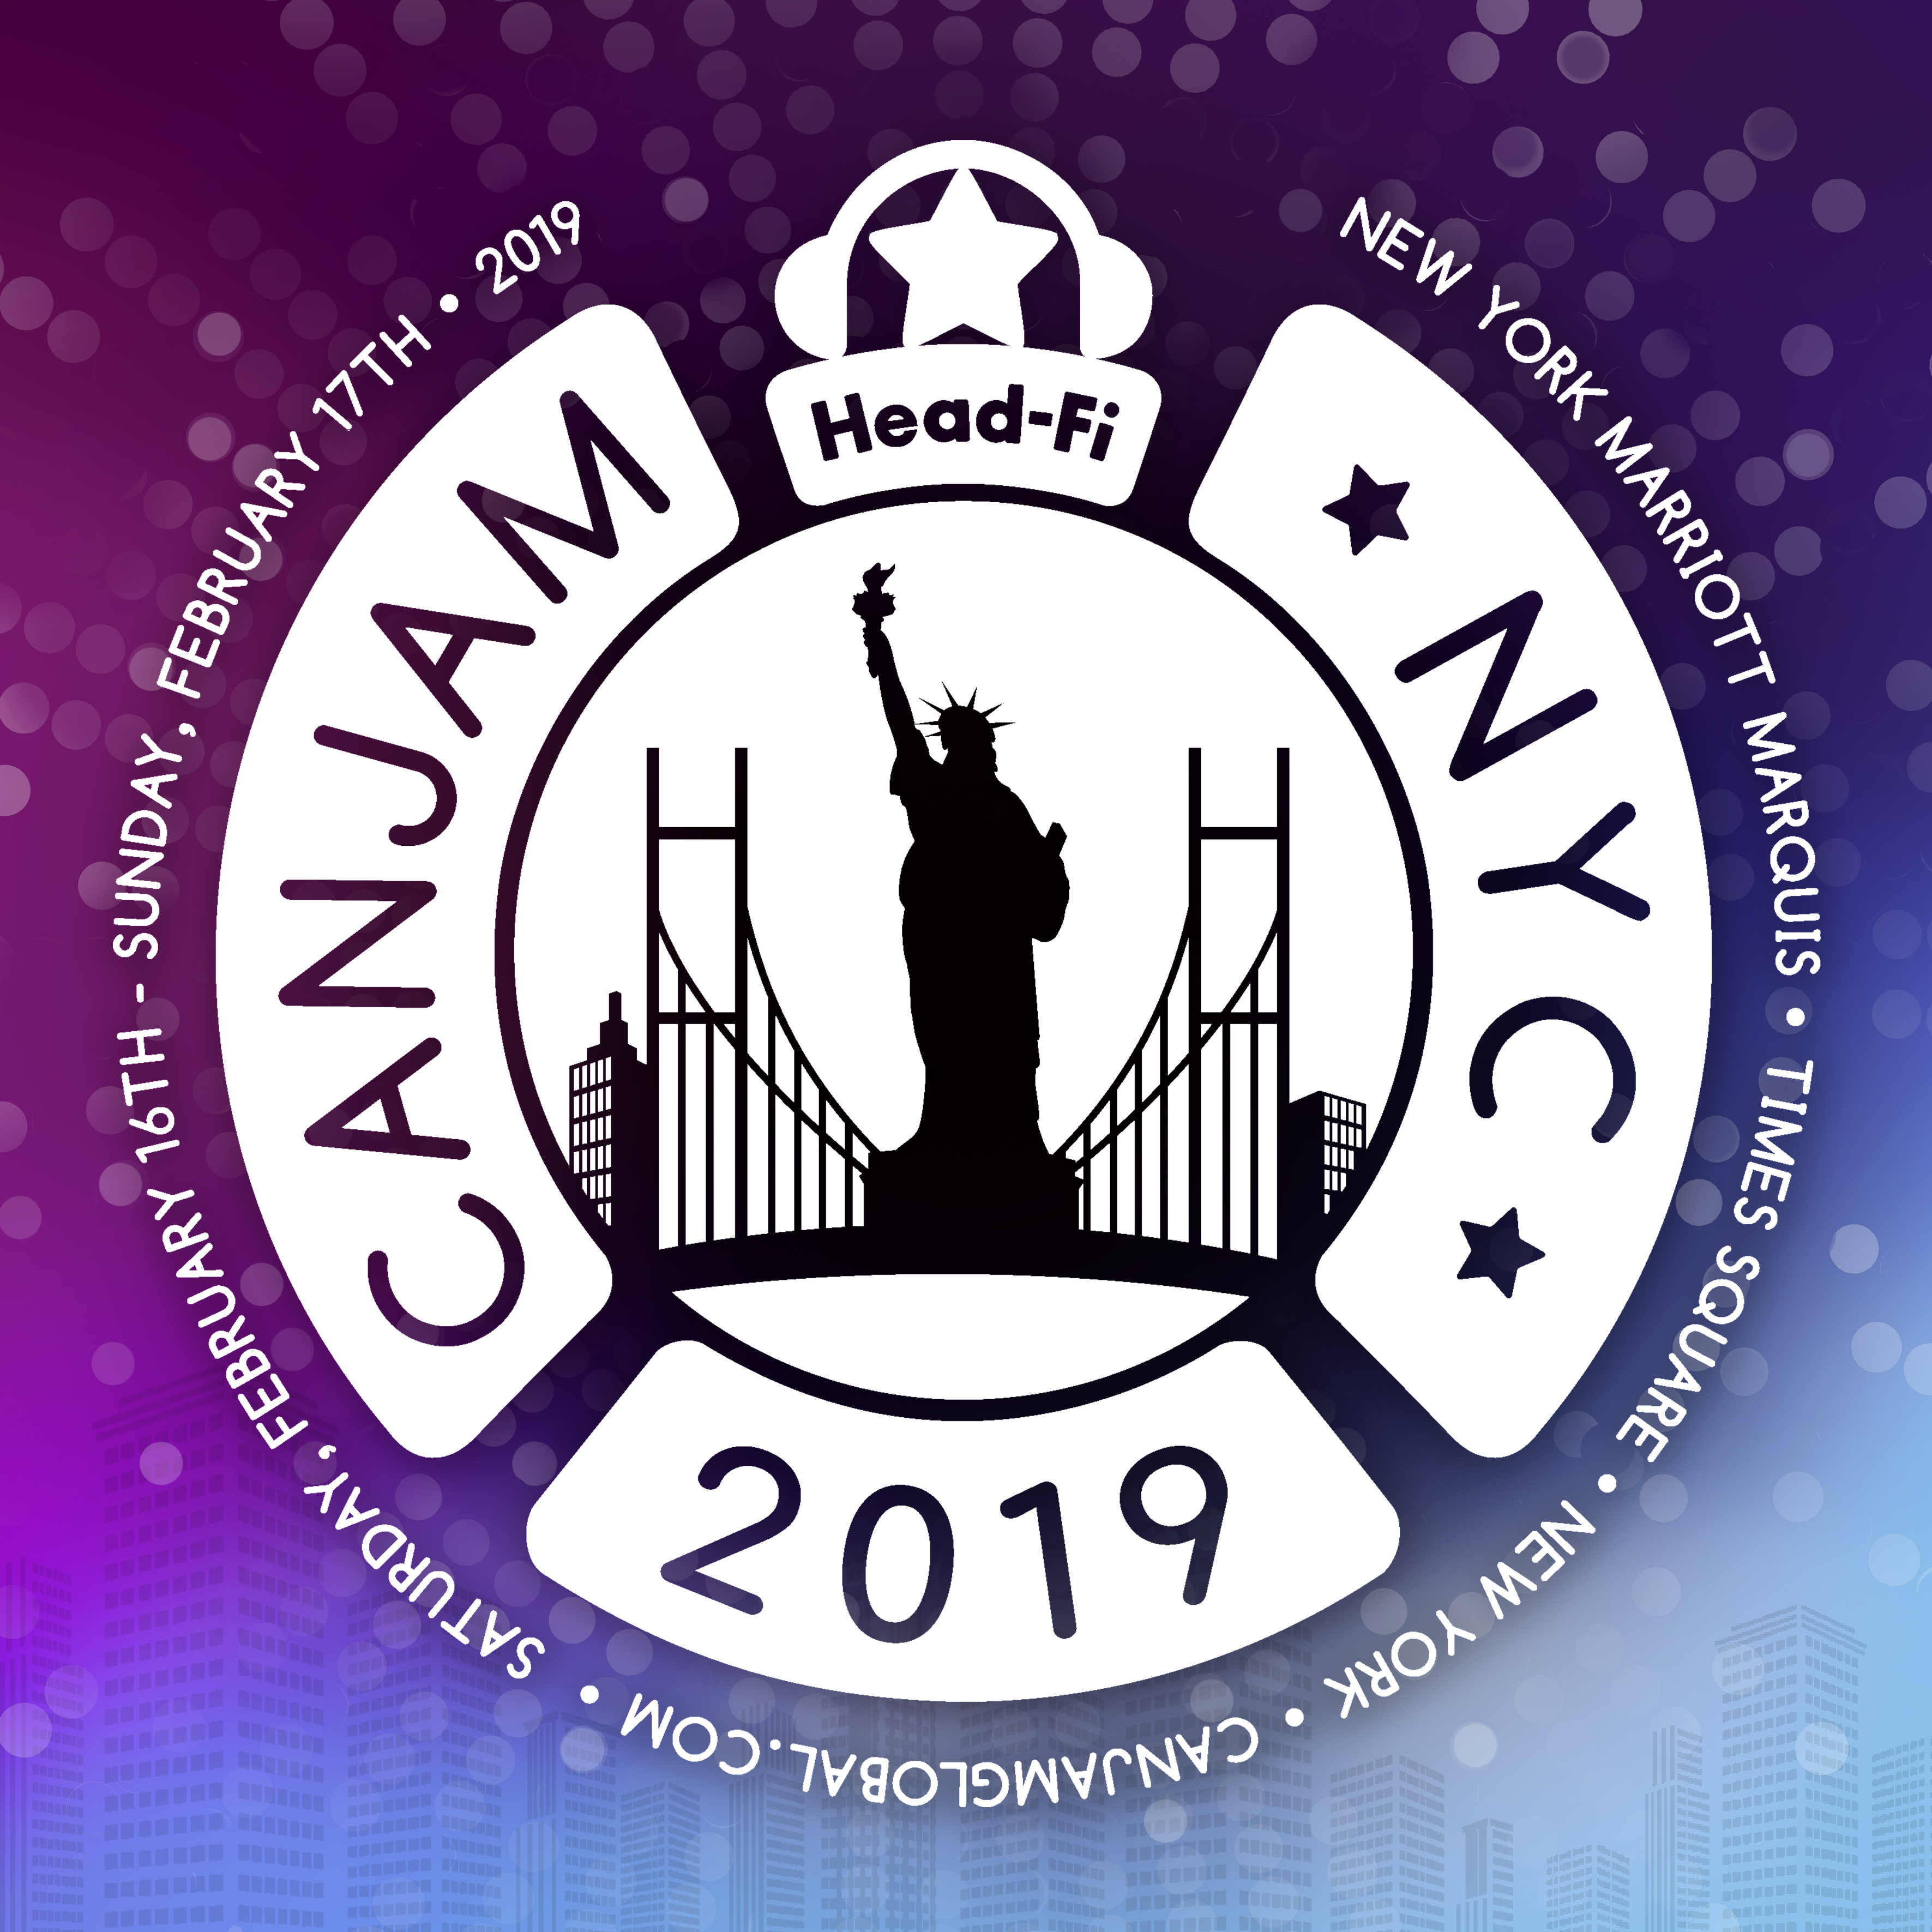 NYC Event Alert: CanJam 2019 in Times Square – 2/16 & 2/17